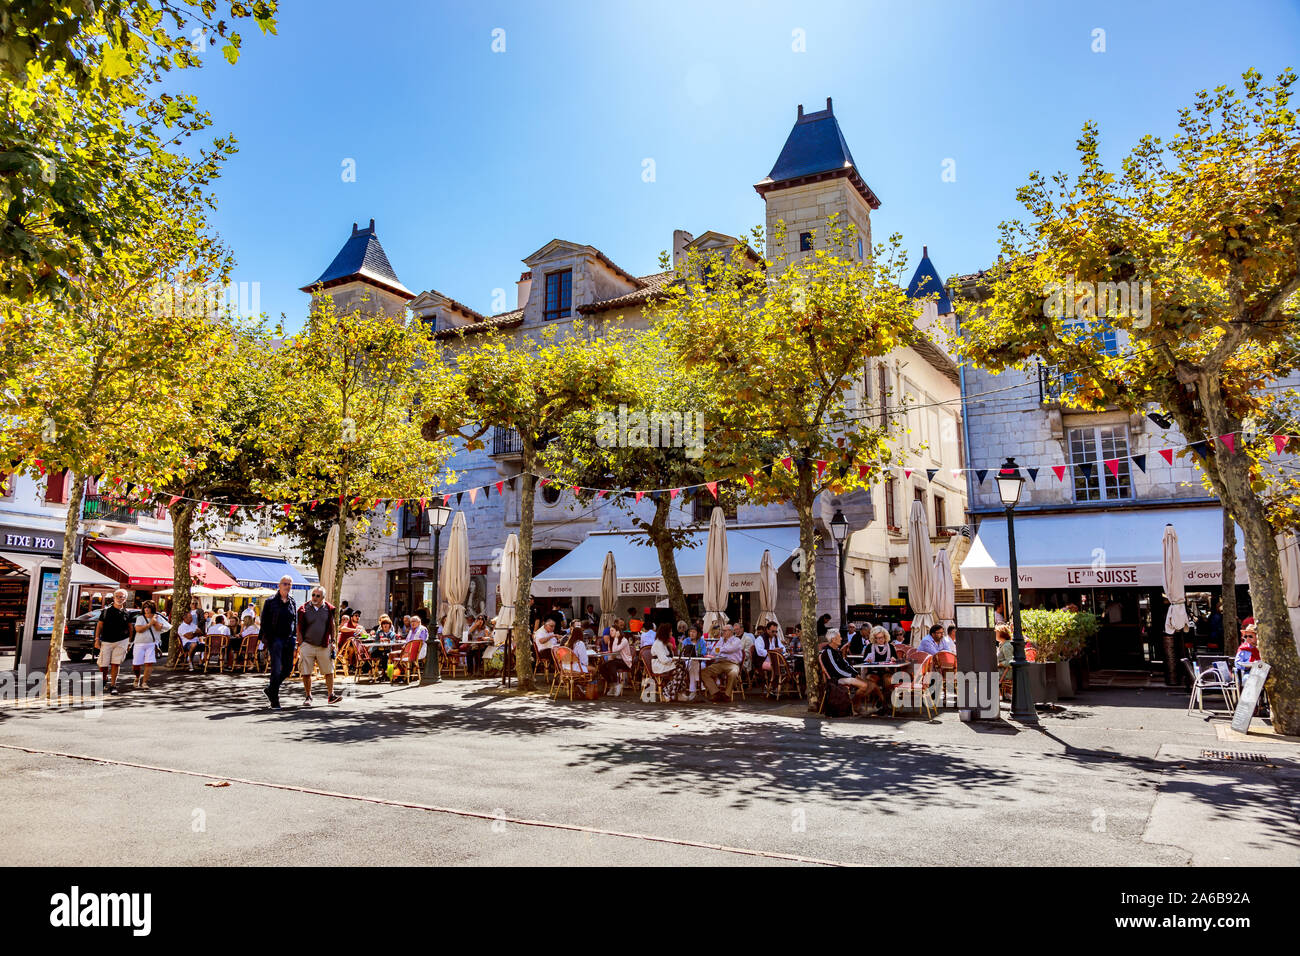 Saint-Jean-de-Luz, France - September 08, 2019 - View of a shopping street in the village Stock Photo